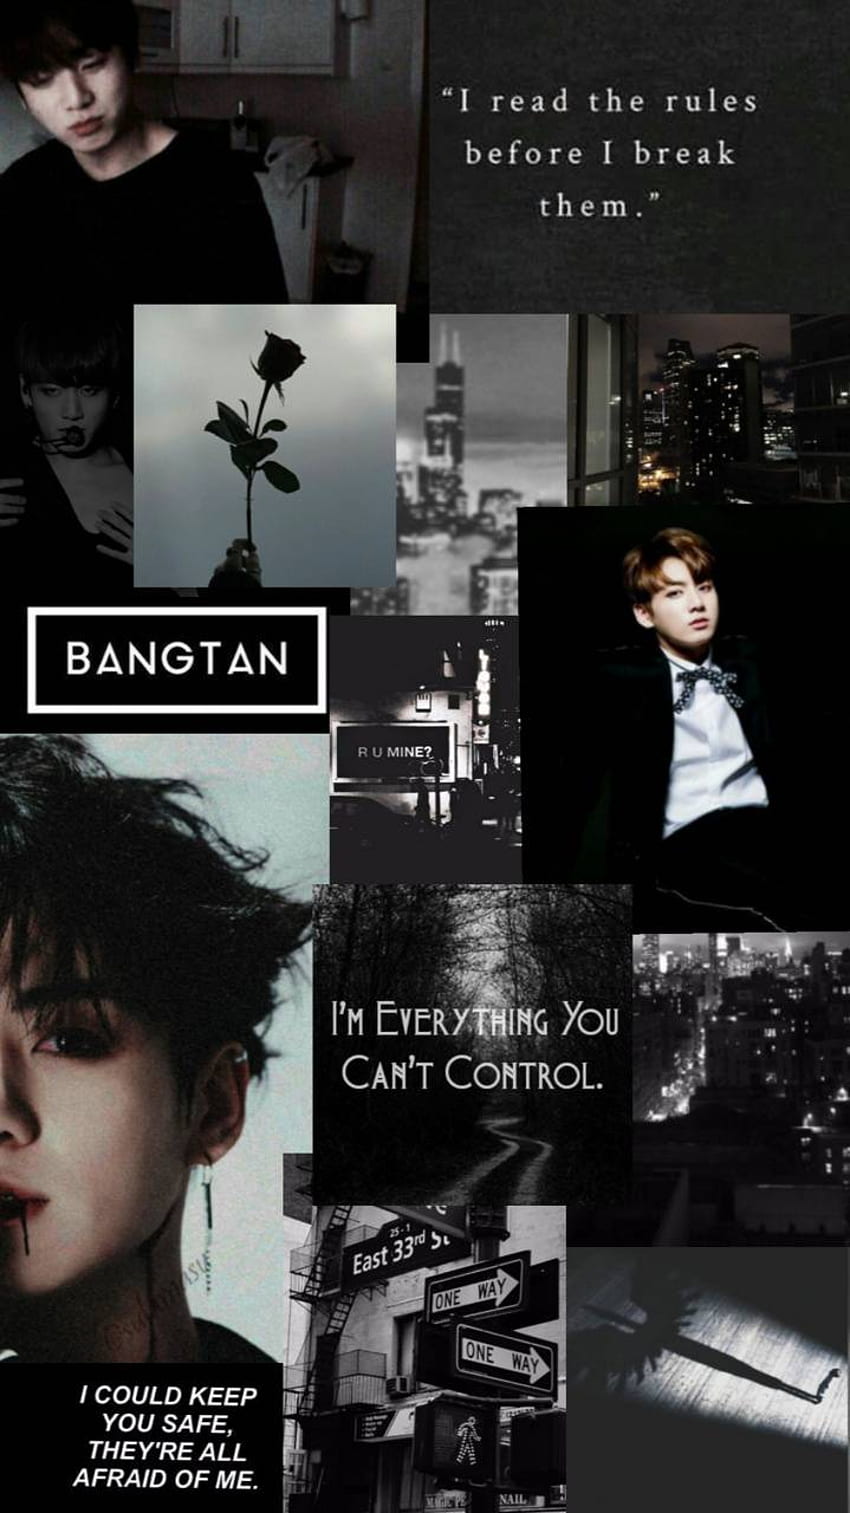 A black and white collage of images of Bangtan and lyrics from their song 'I'm everything you can't control' - Jungkook